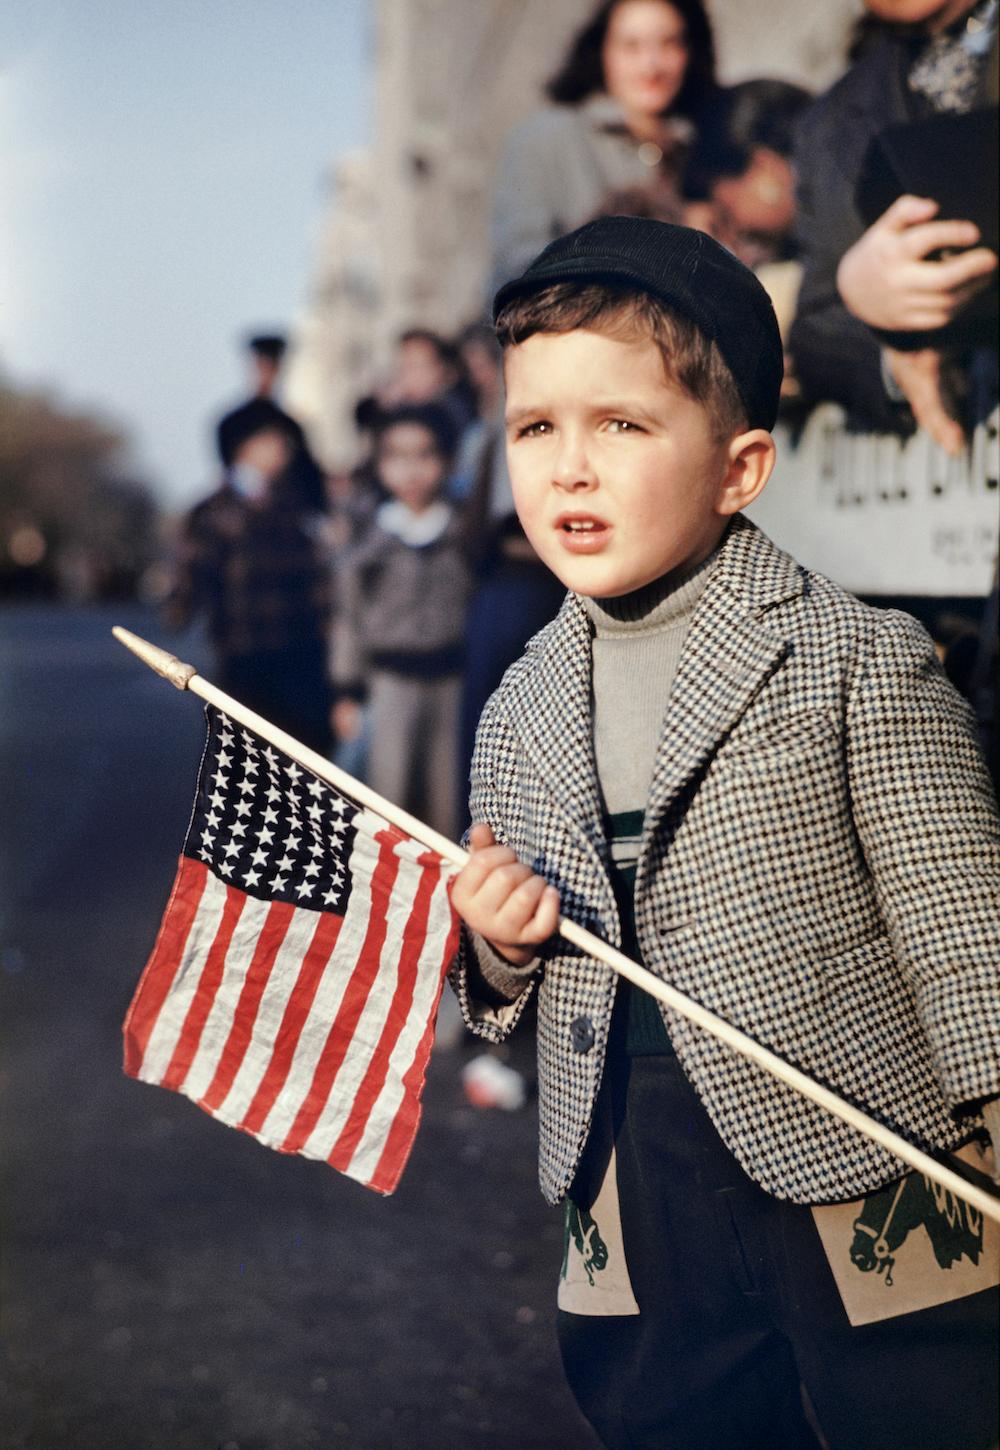 Boy with a Flag at Parade, New York City